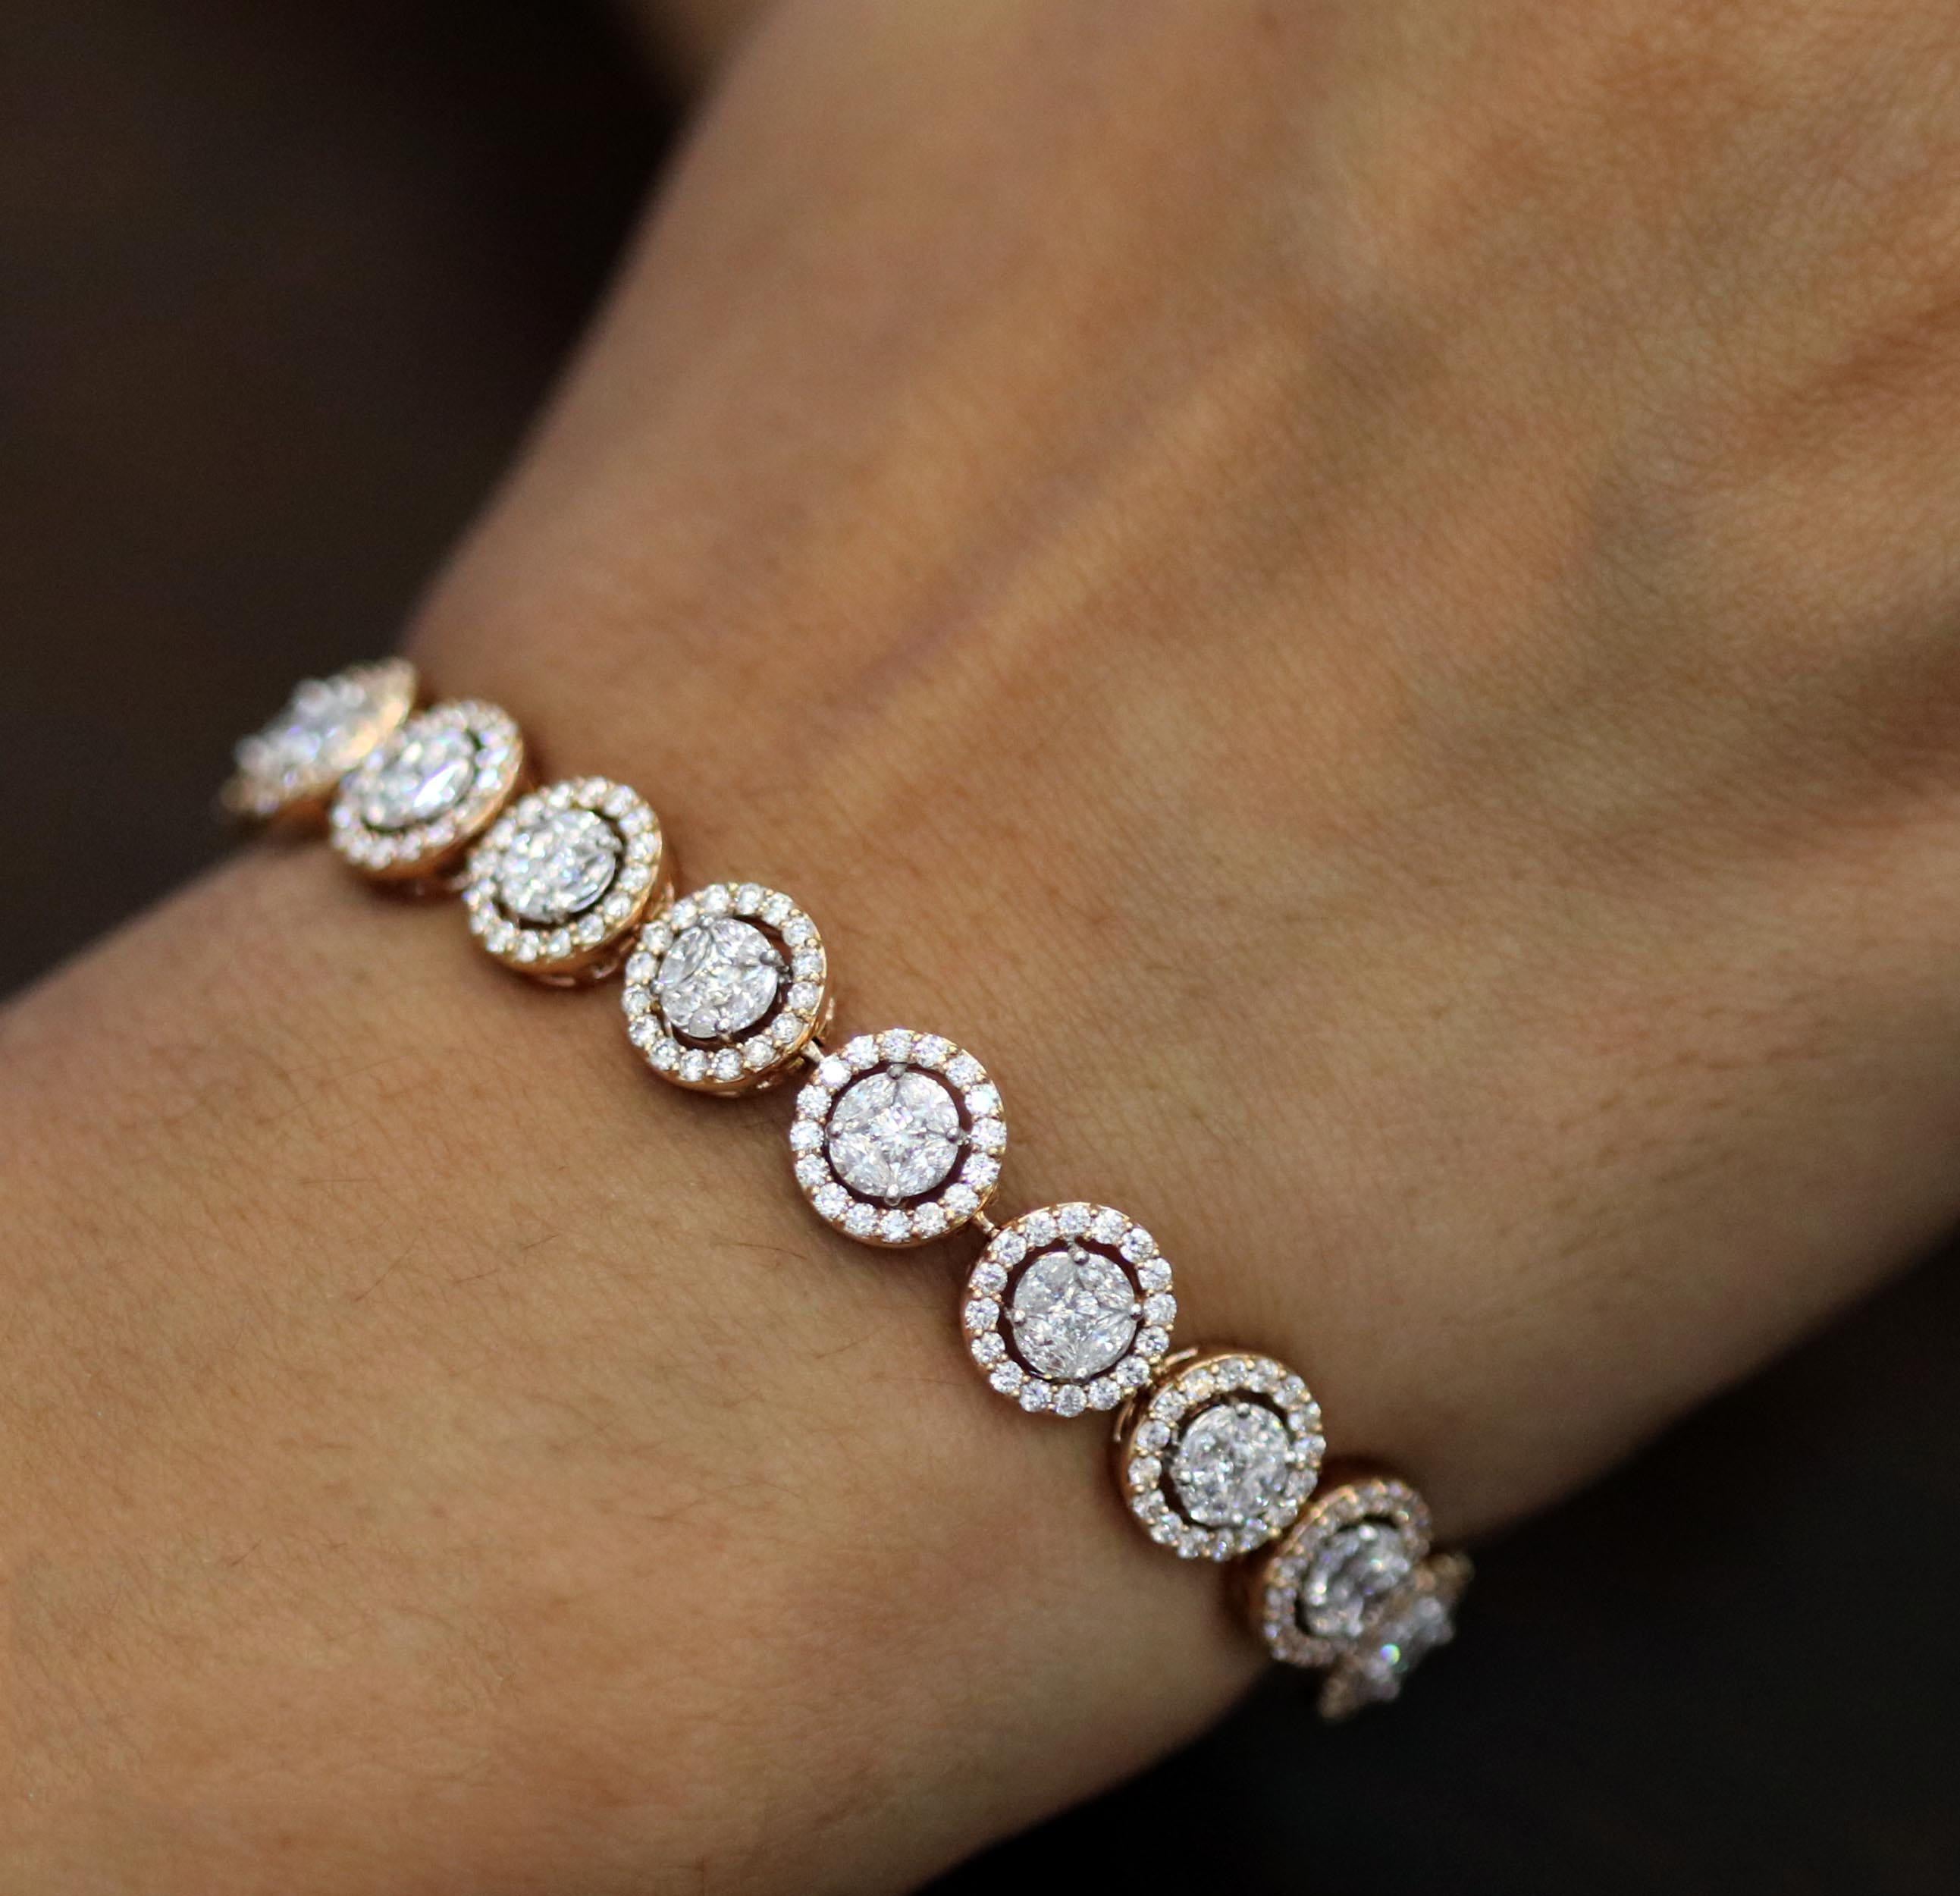 Gross Weight: 18.62 Grams
Diamond Weight: 5.43 cts 
IGI Certified:  Summary No: 22J975521807

Video of the product can be shared on request.

Paying homage to restrained opulence is this classic 18K white and rose gold tennis bracelet adorned with